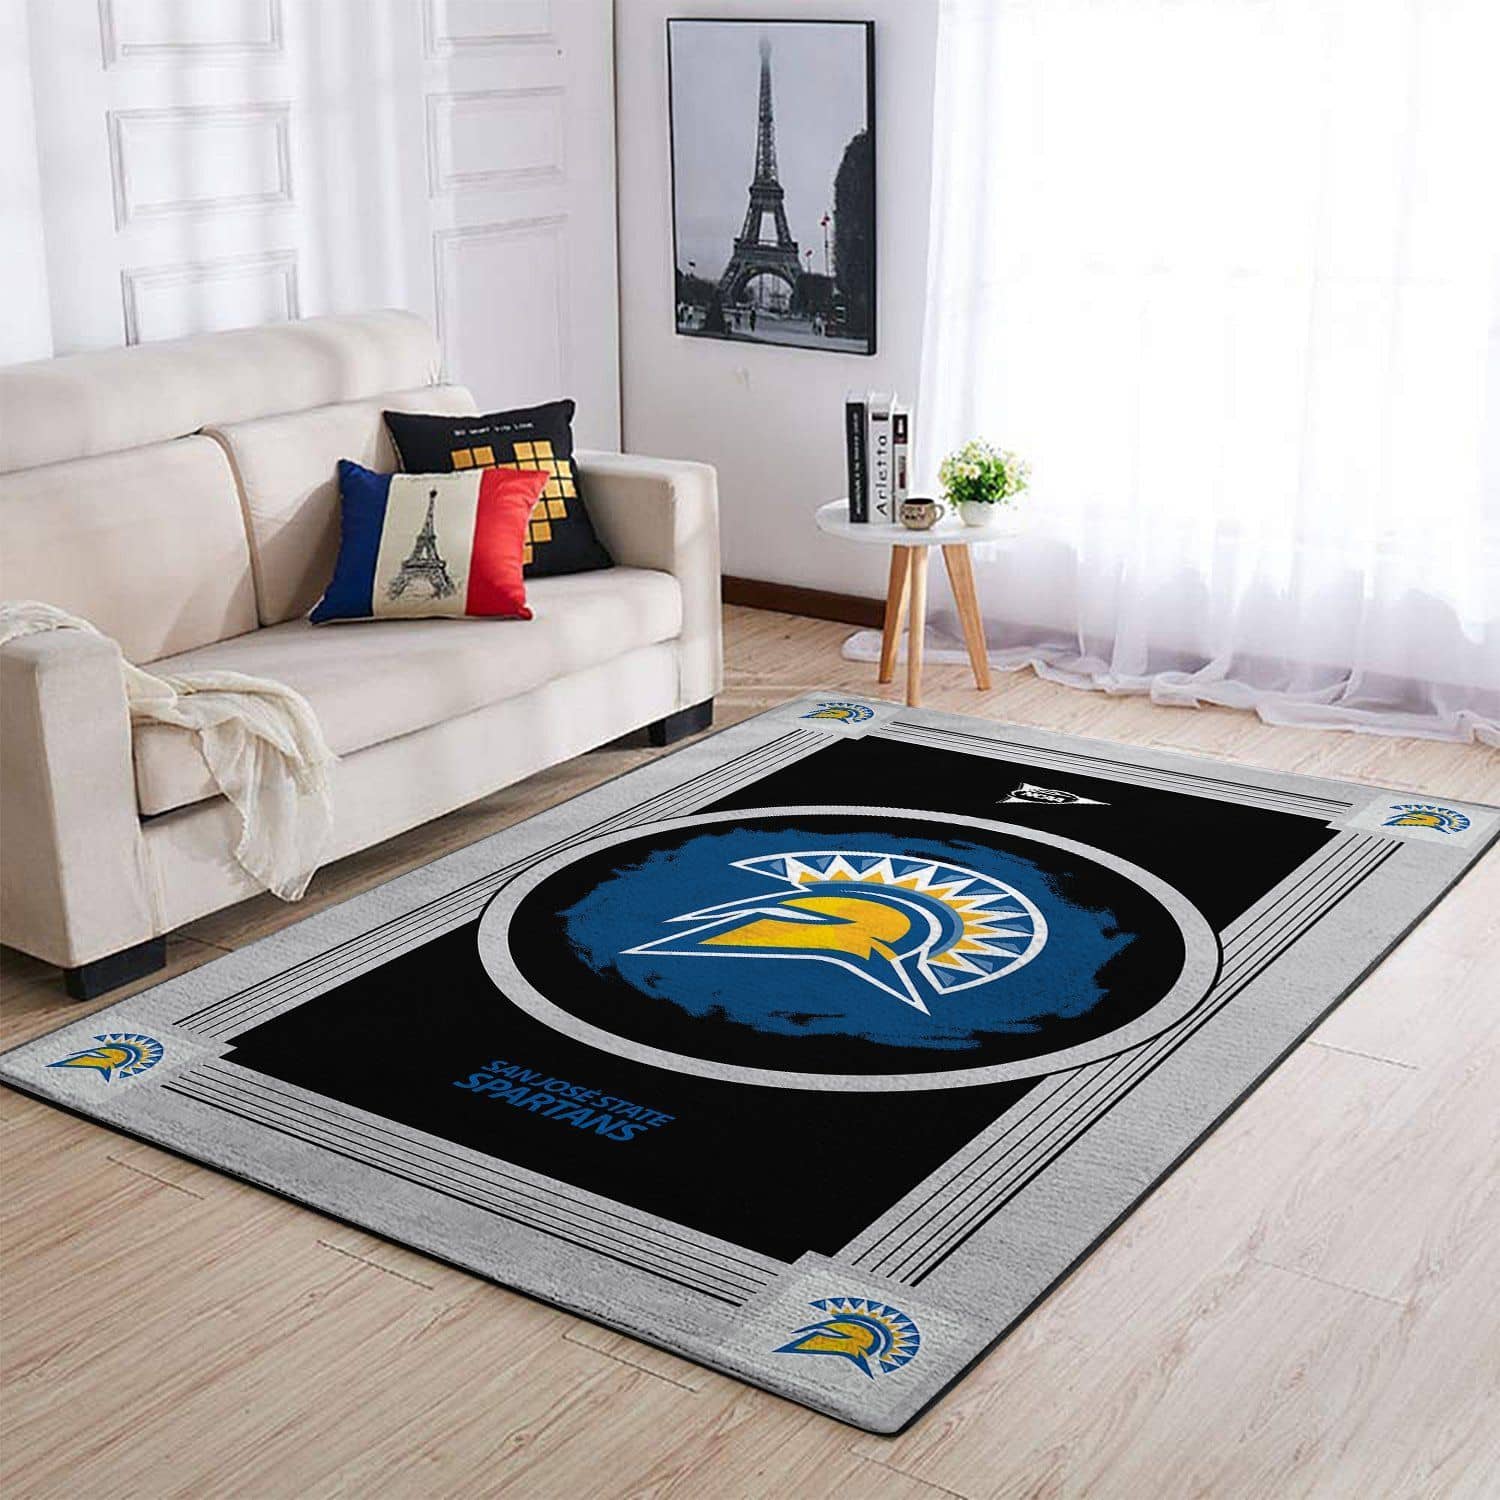 Amazon San Jose State Spartans Living Room Area No4942 Rug